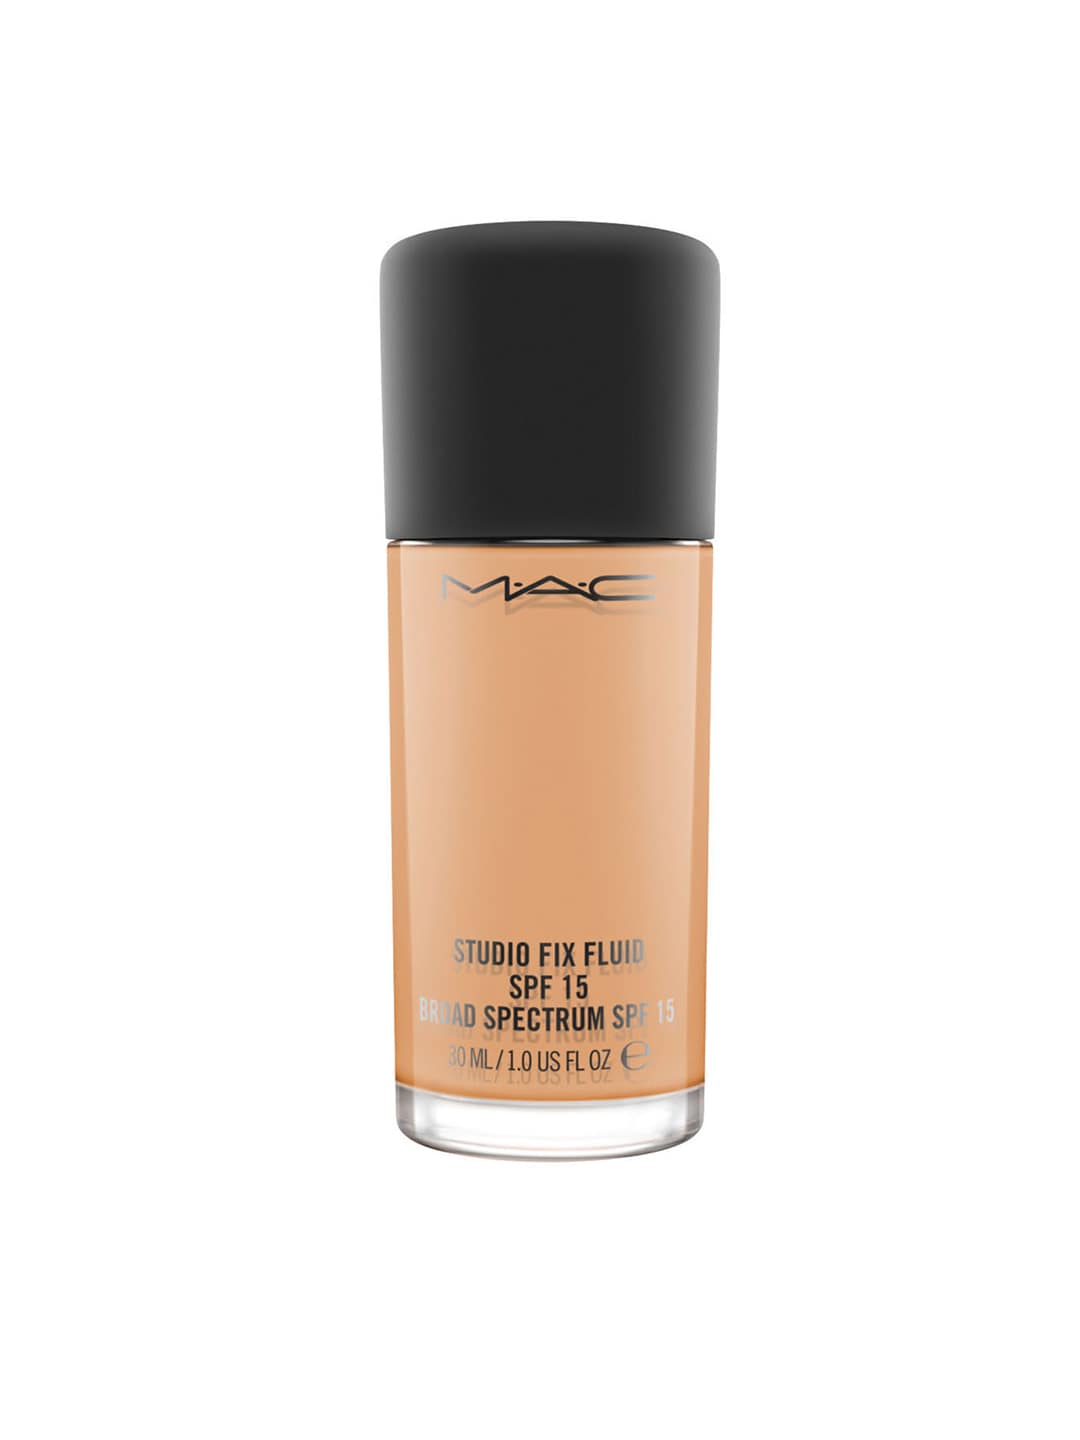 M.A.C Studio Fix Fluid Broad Spectrum Foundation with SPF 15 - NW35 30 ml Price in India